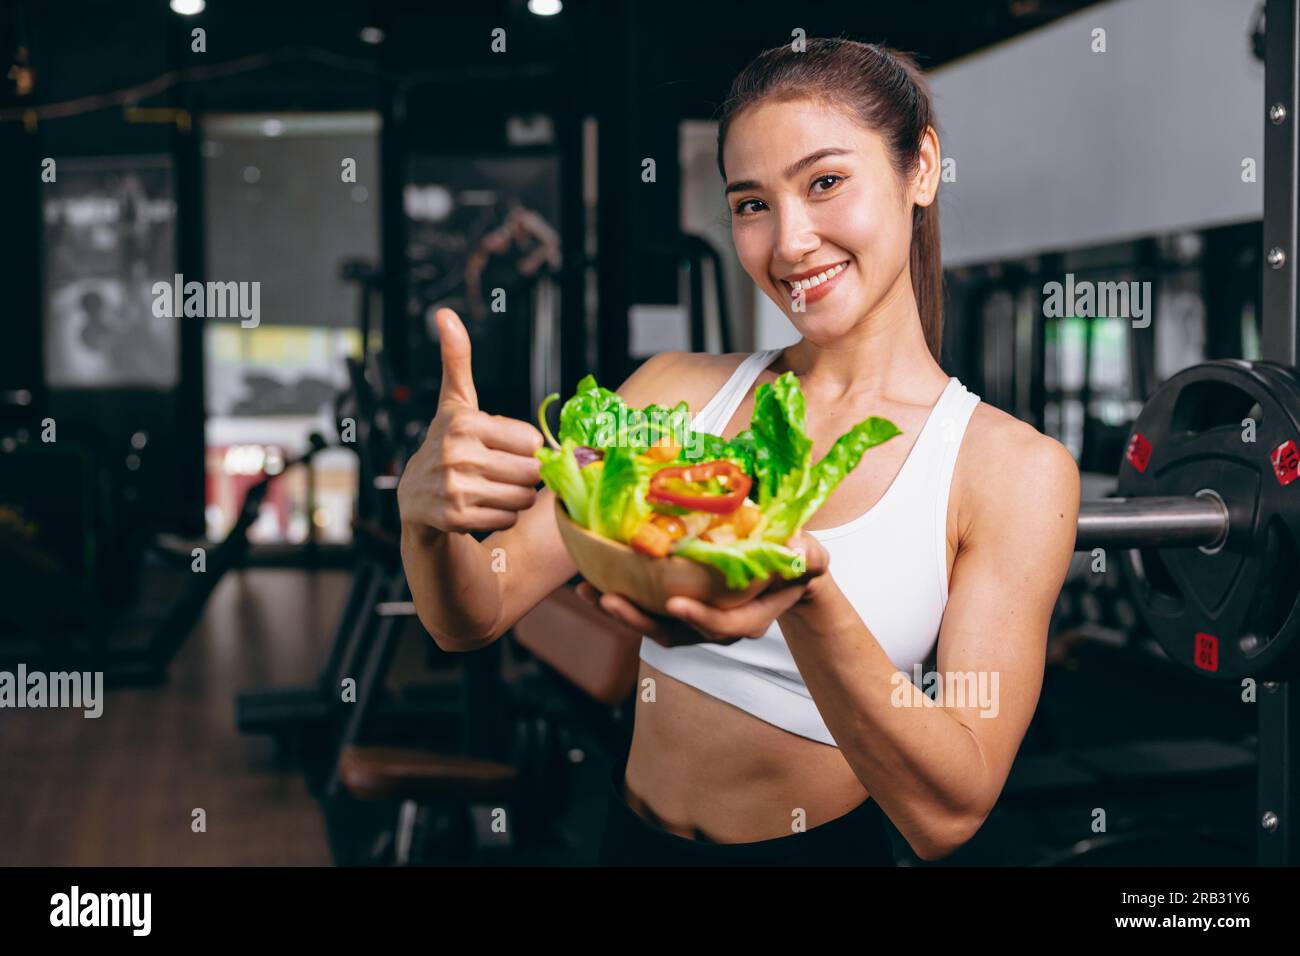 asian young sport woman in fitness sport club with healthy food eating vegetables mix salad diet low calories Stock Photo